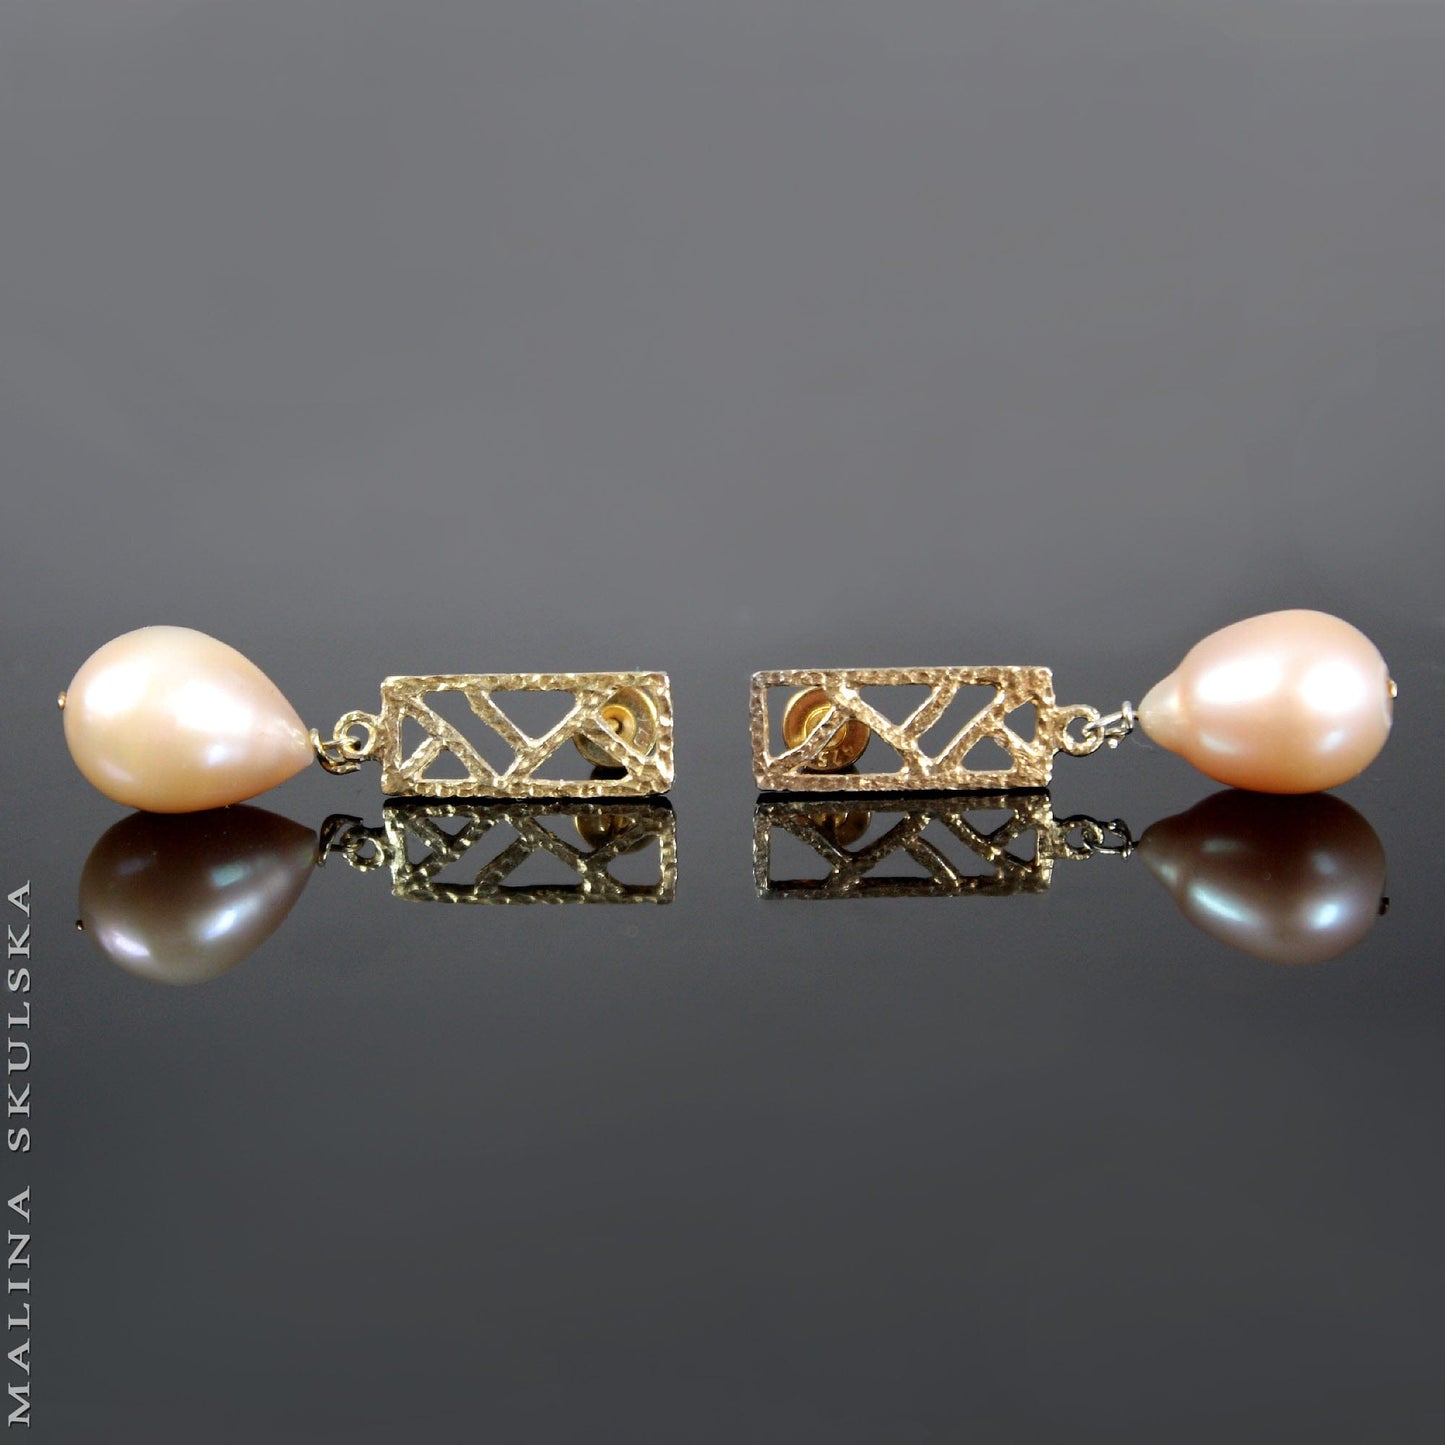 Statement Gold-plated Stud Earrings With Pearls MALINA SKULSKA